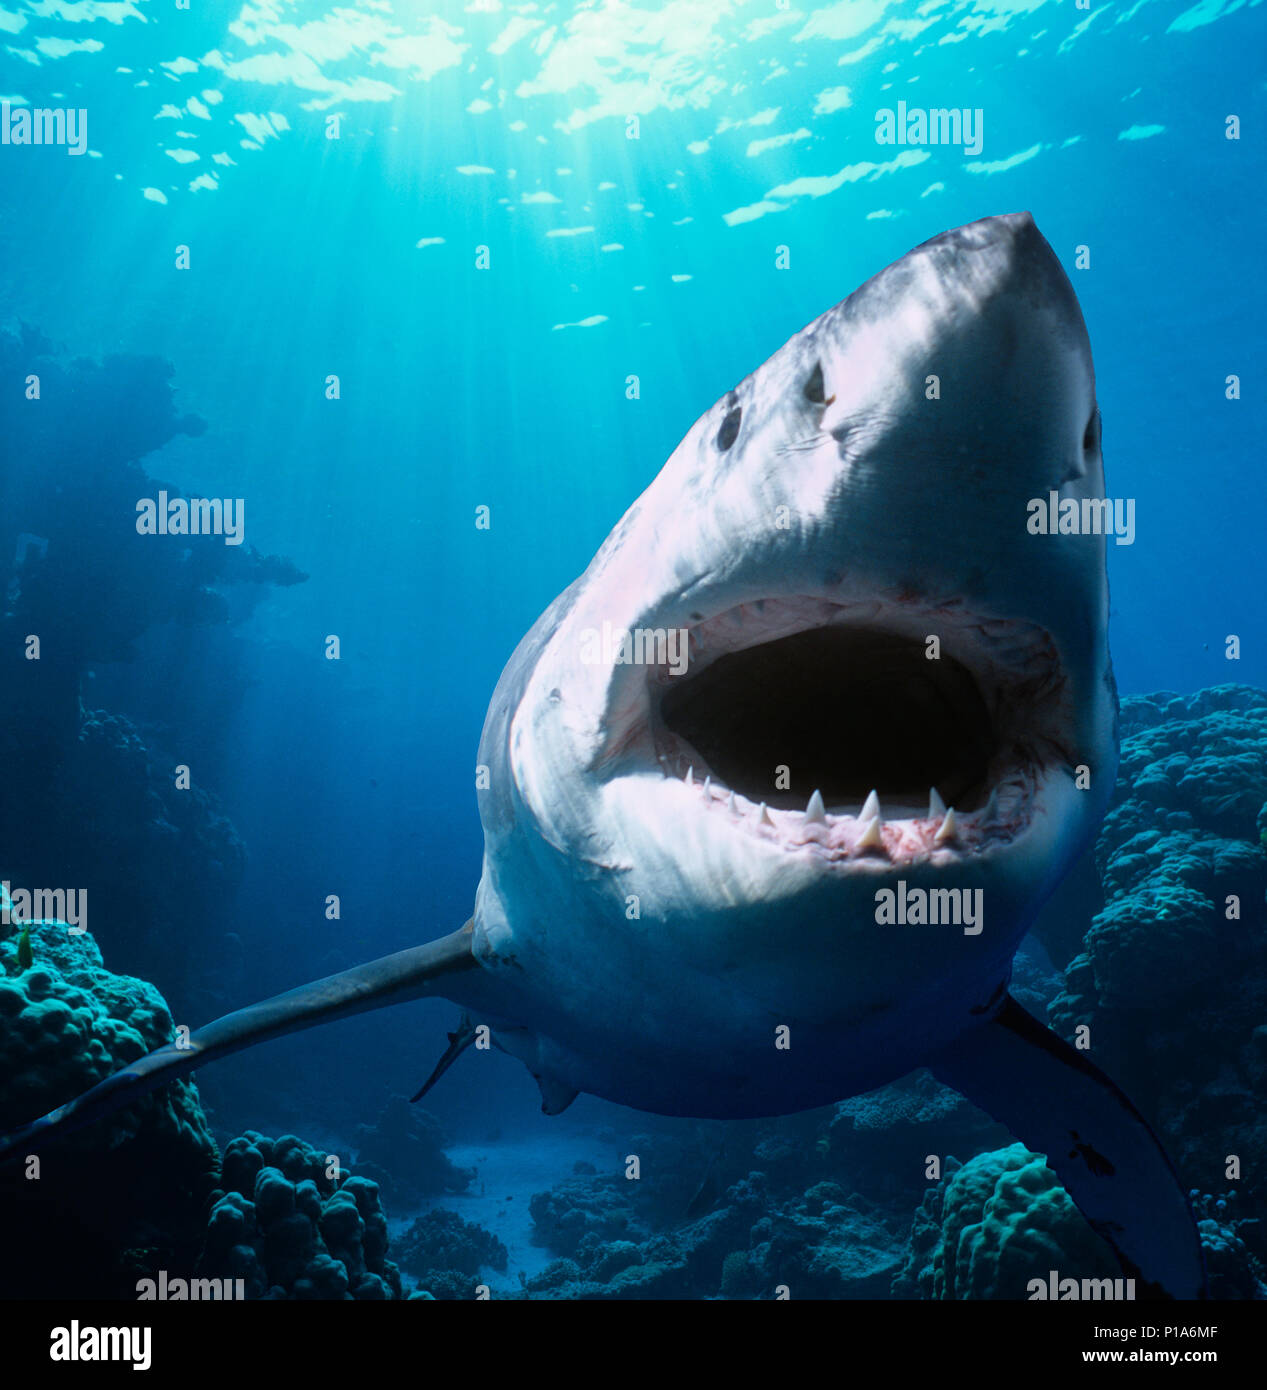 Great White Shark (Carcharodon carcharias), Guadalupe Island, Mexico - Pacific Ocean.   Image digitally altered to remove distracting or to add more i Stock Photo